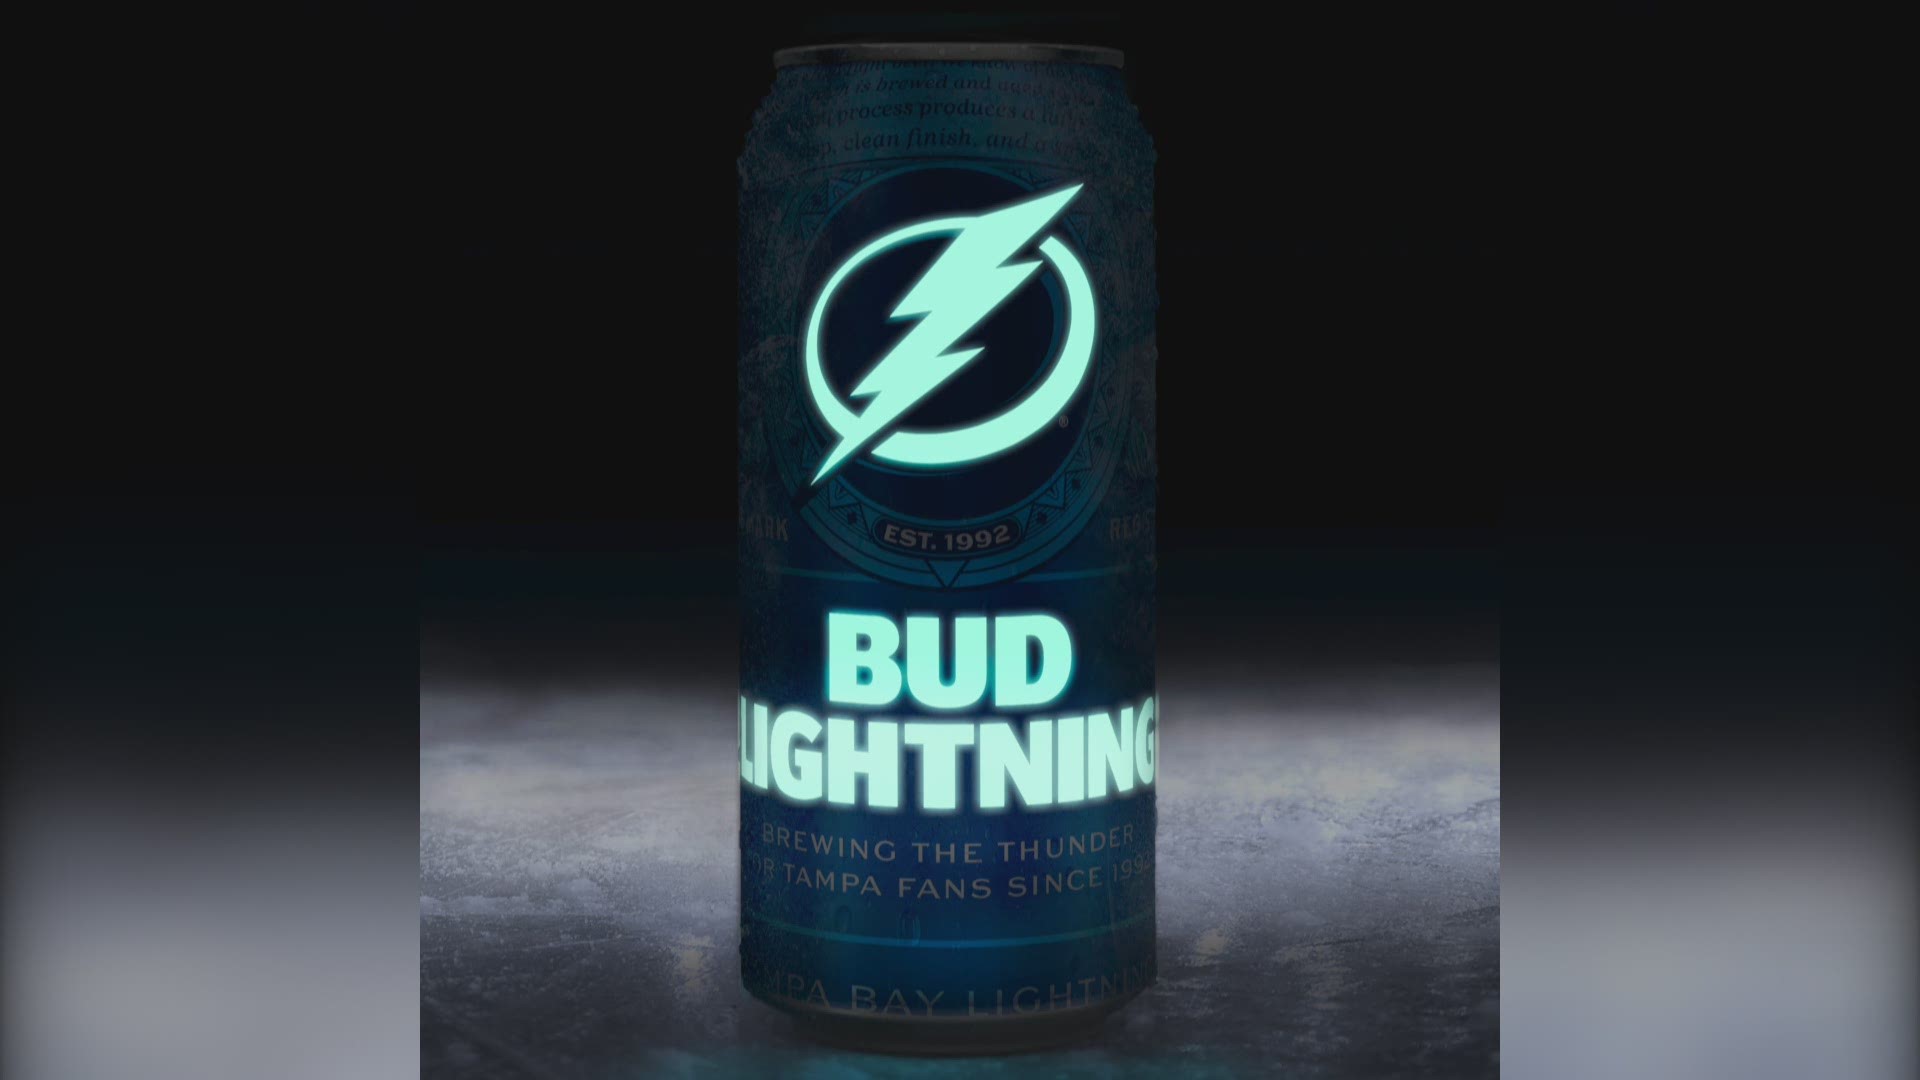 If the Tampa Bay Lightning "wins it all," Bud Light cans will sport the Lightning logo.